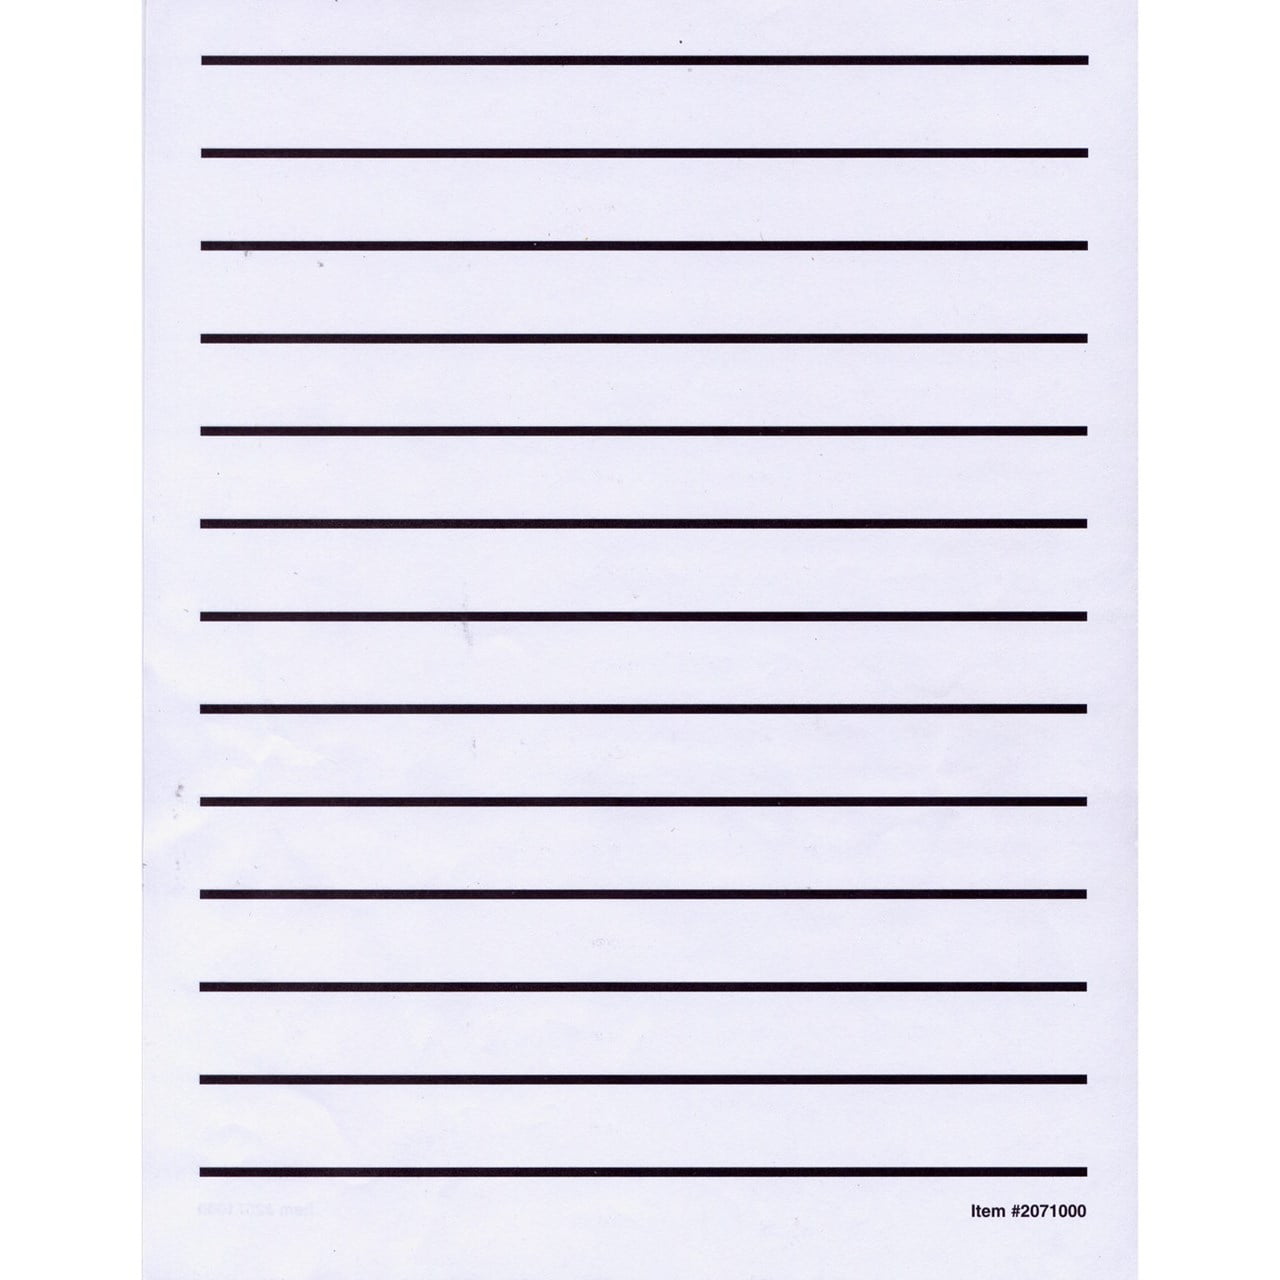 Bold Line Letter-Writing Paper: 0.4375 Inch Line Spacing